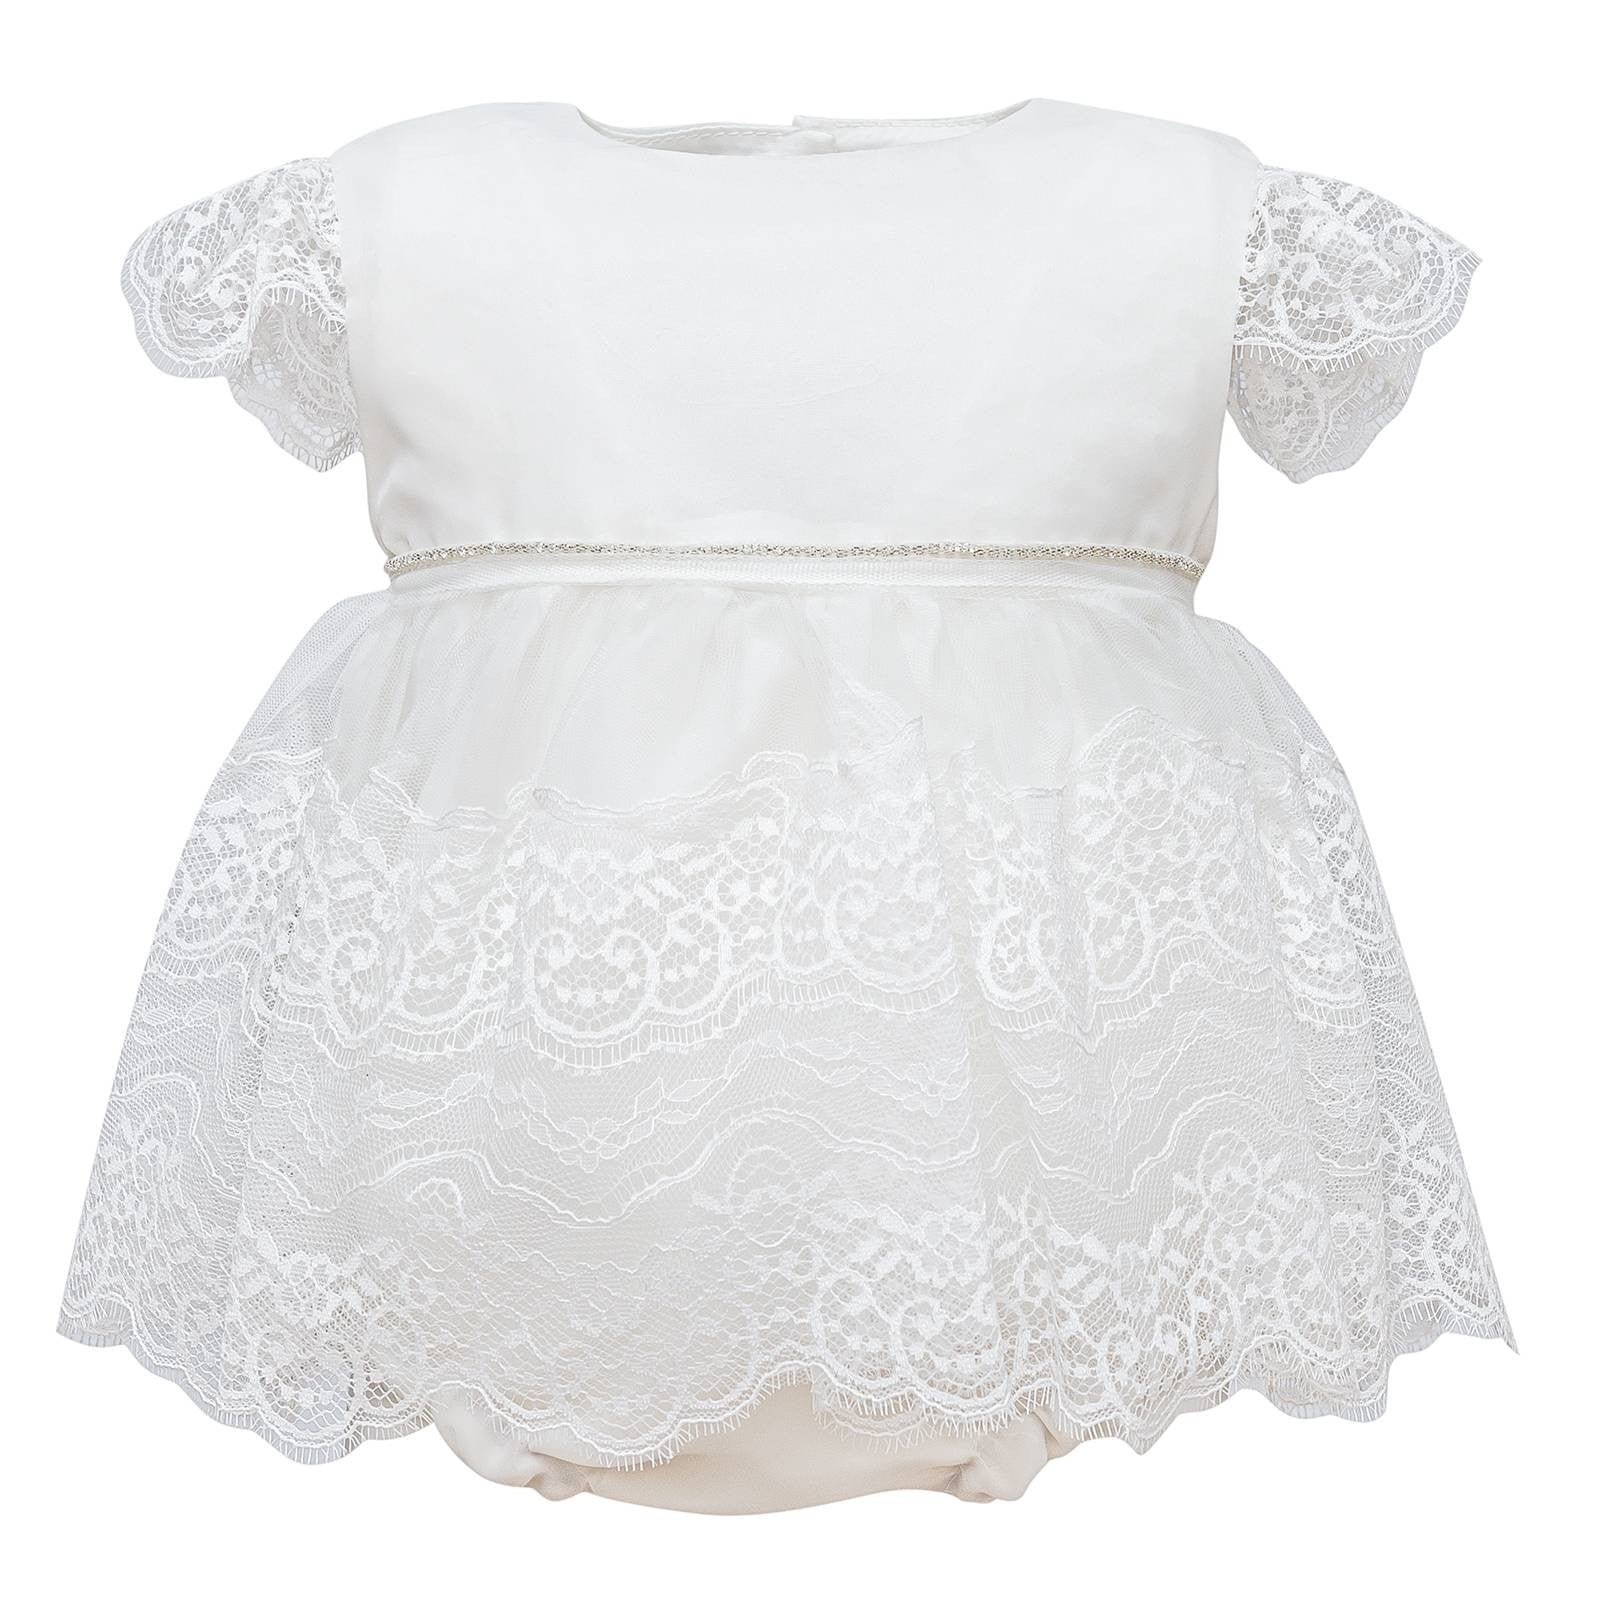 Pagliaccetto Elegante Con Pizzo Panna Neonata ISABEL IS458 - ISABEL - LuxuryKids